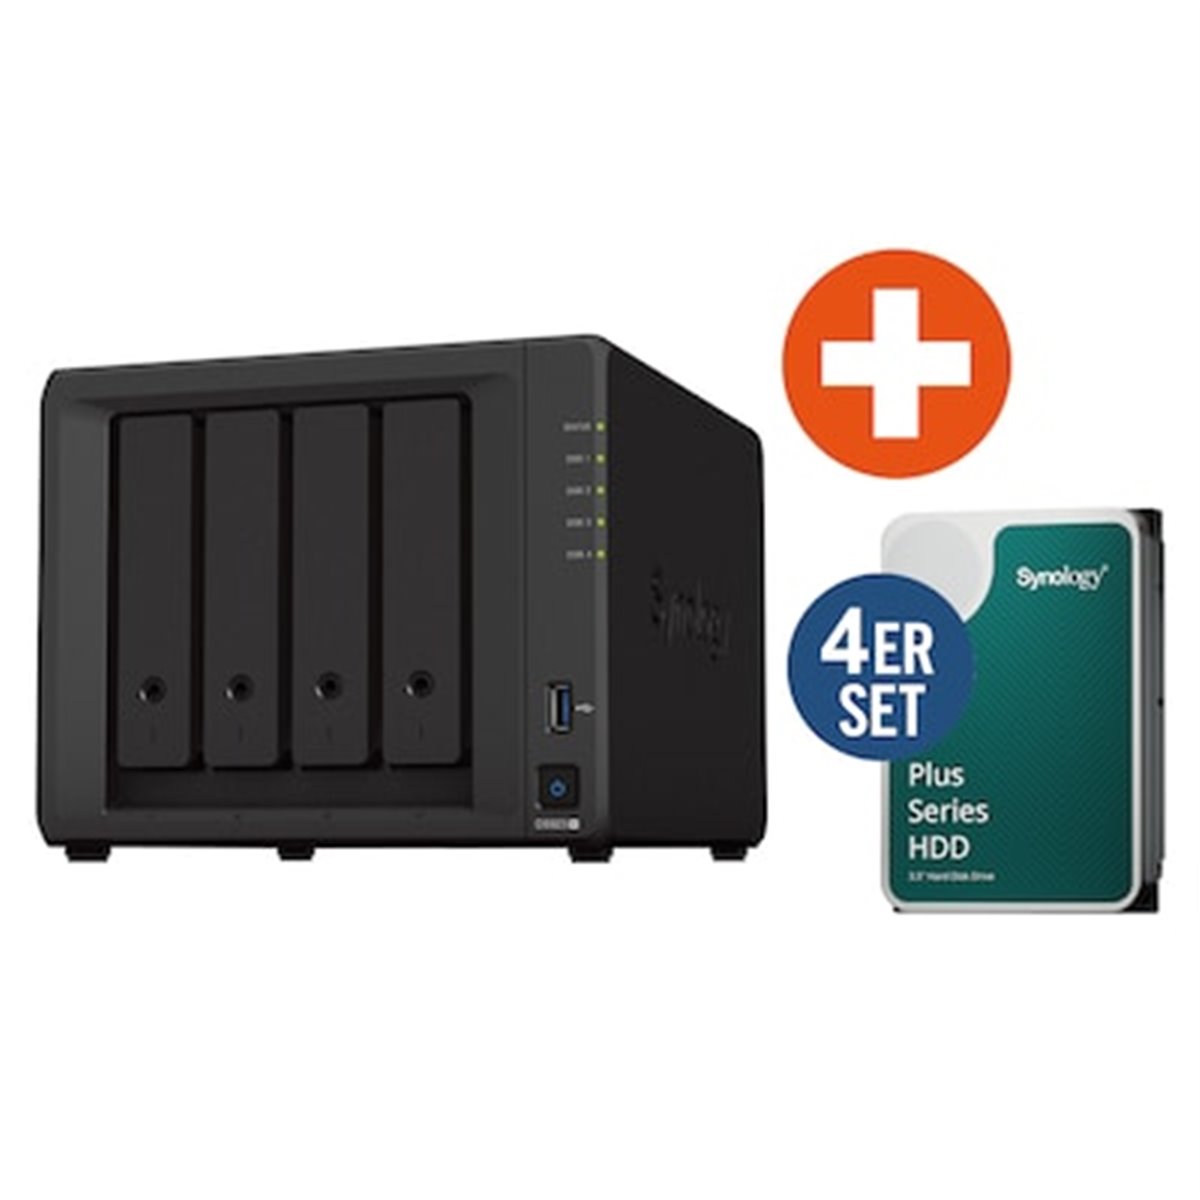 Synology DS923+ NAS System 4-Bay 16 TB inkl. 4x 4 HDD HAT3300-4T - Storage server - NAS